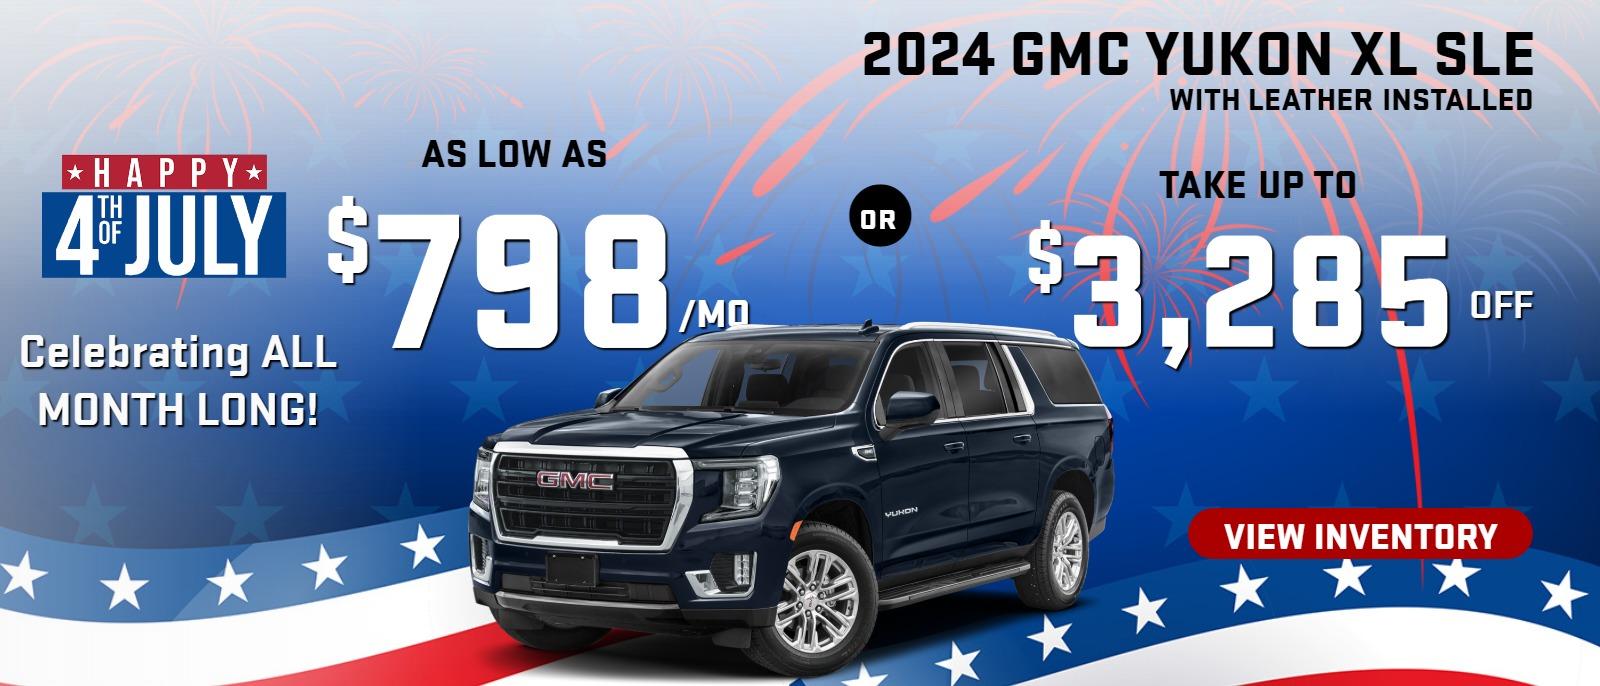 2024 Yukon XL SLE 
(WITH LEATHER INSTALLED) 
 Stock G6929     
 
Take up to 
$3,285 OFF

OR 

AS LOW AS
$798/mo